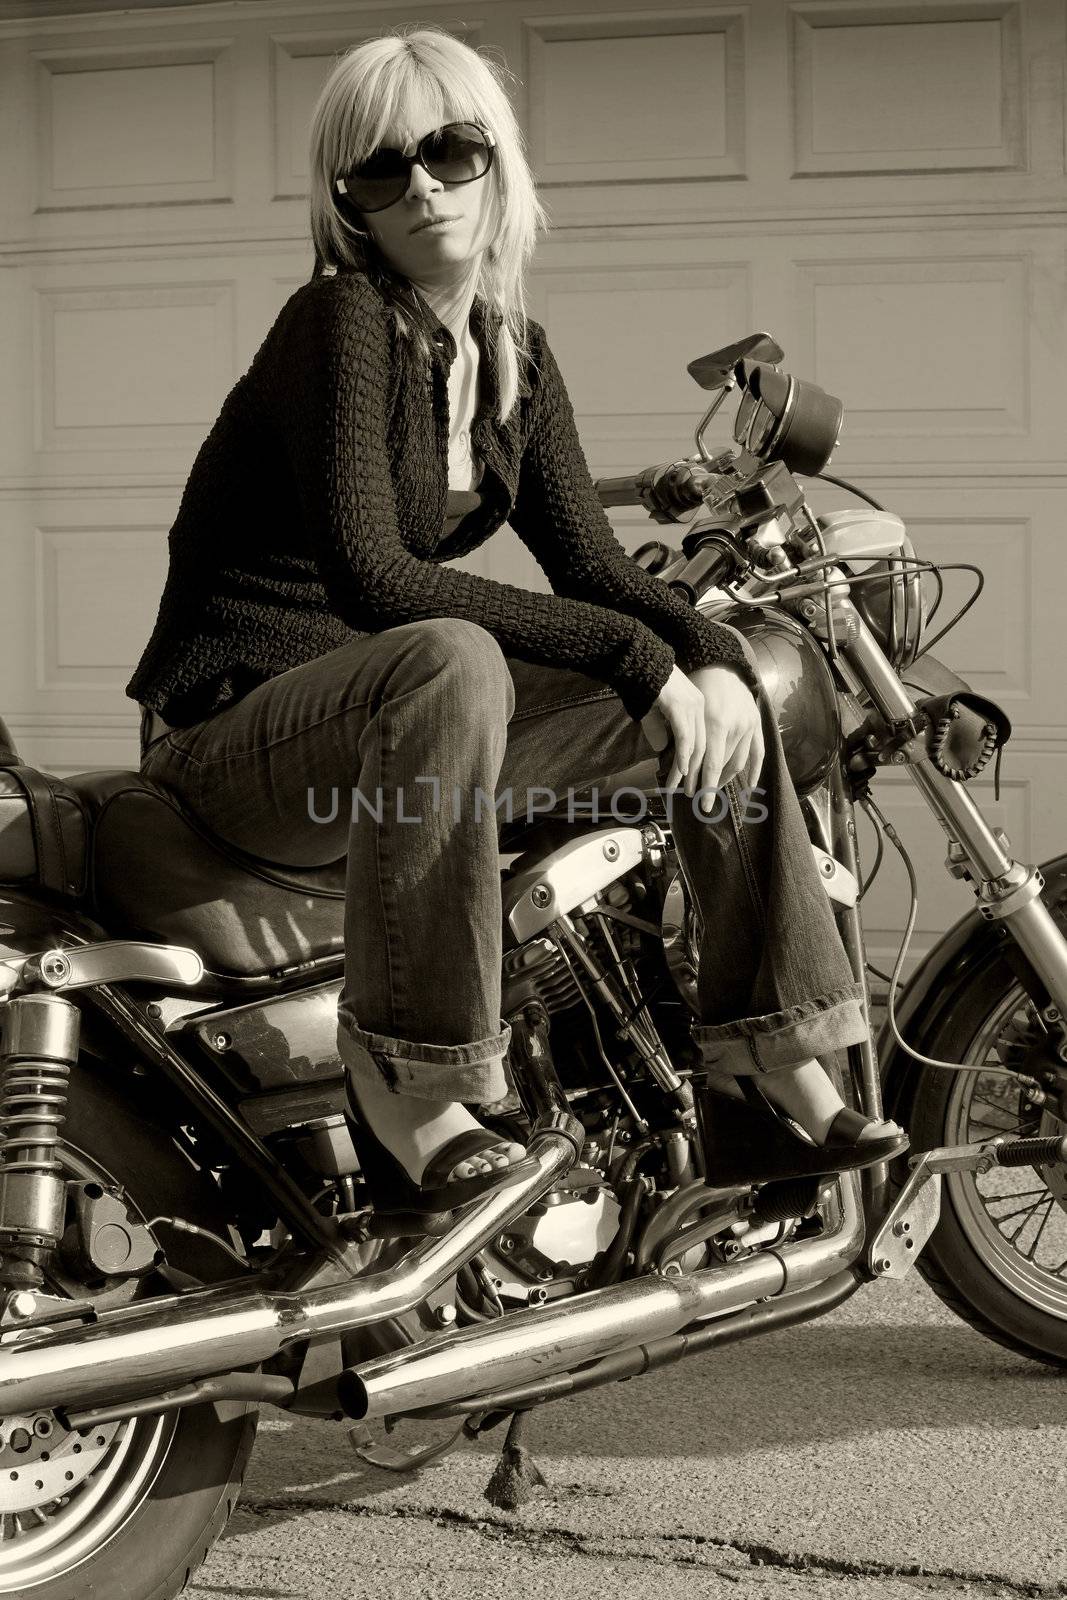 A beautiful blonde female sitting on a motorcycle.
